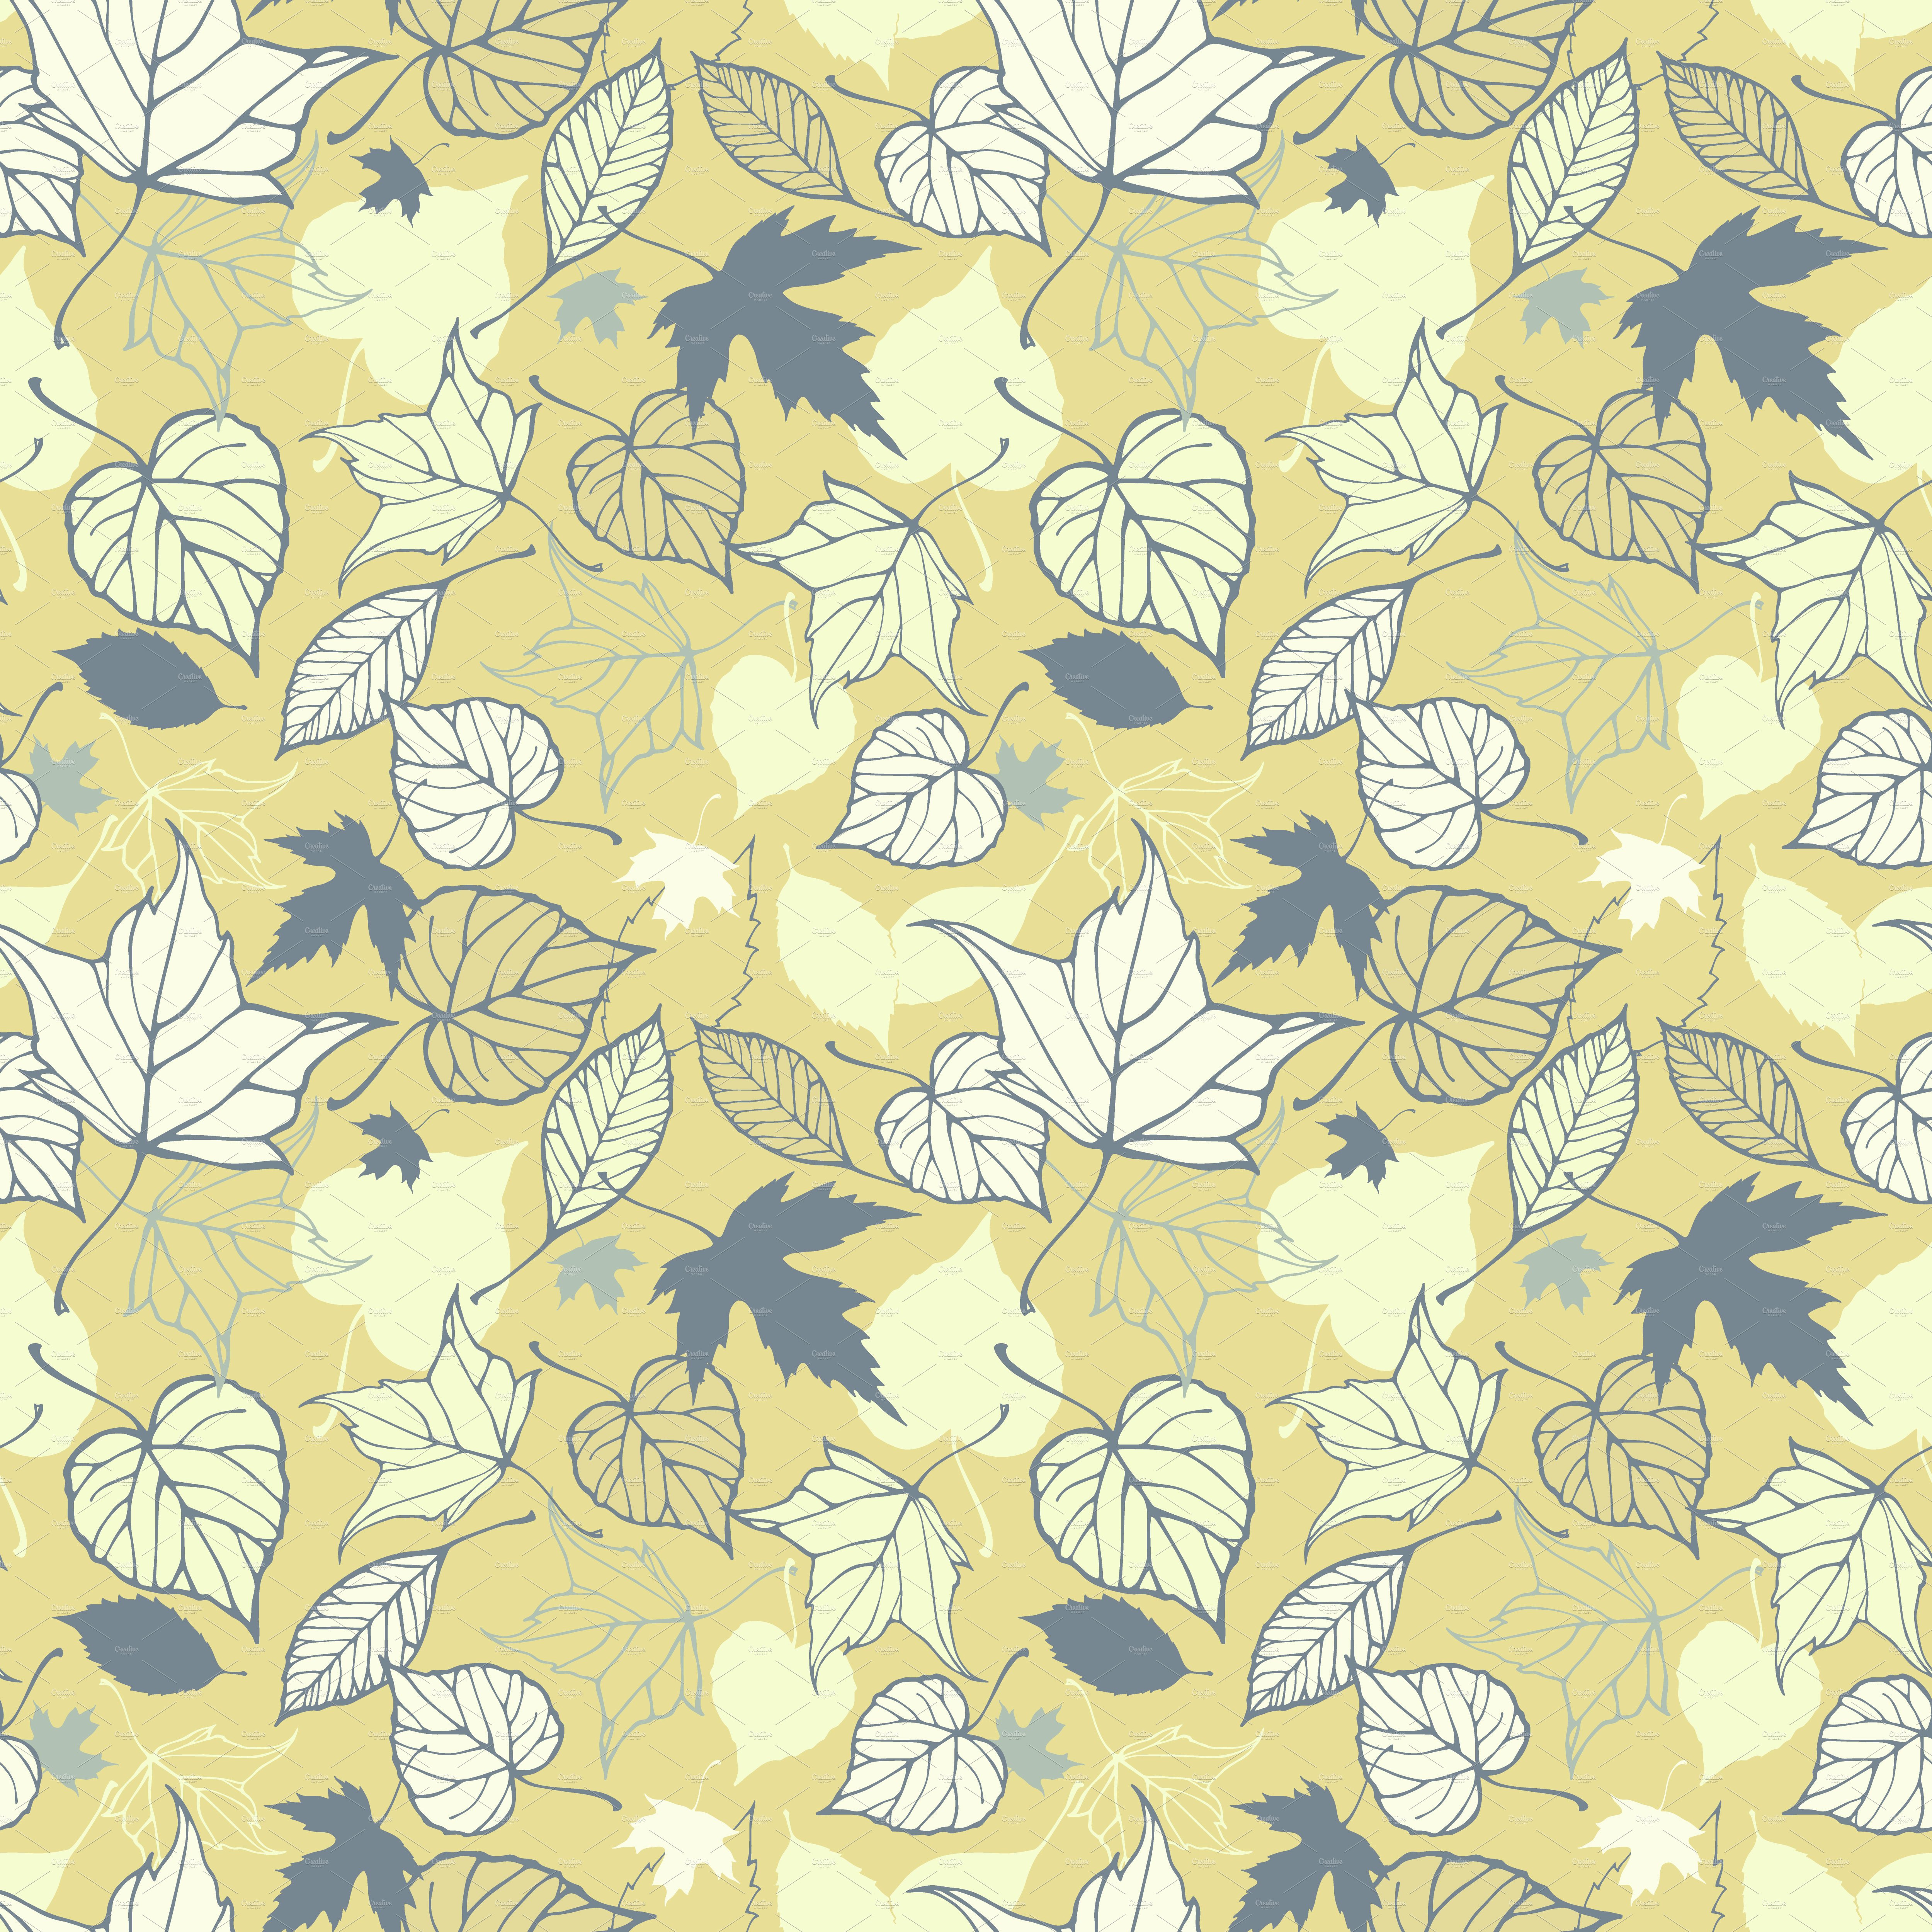 Pattern of leaves on a yellow background.